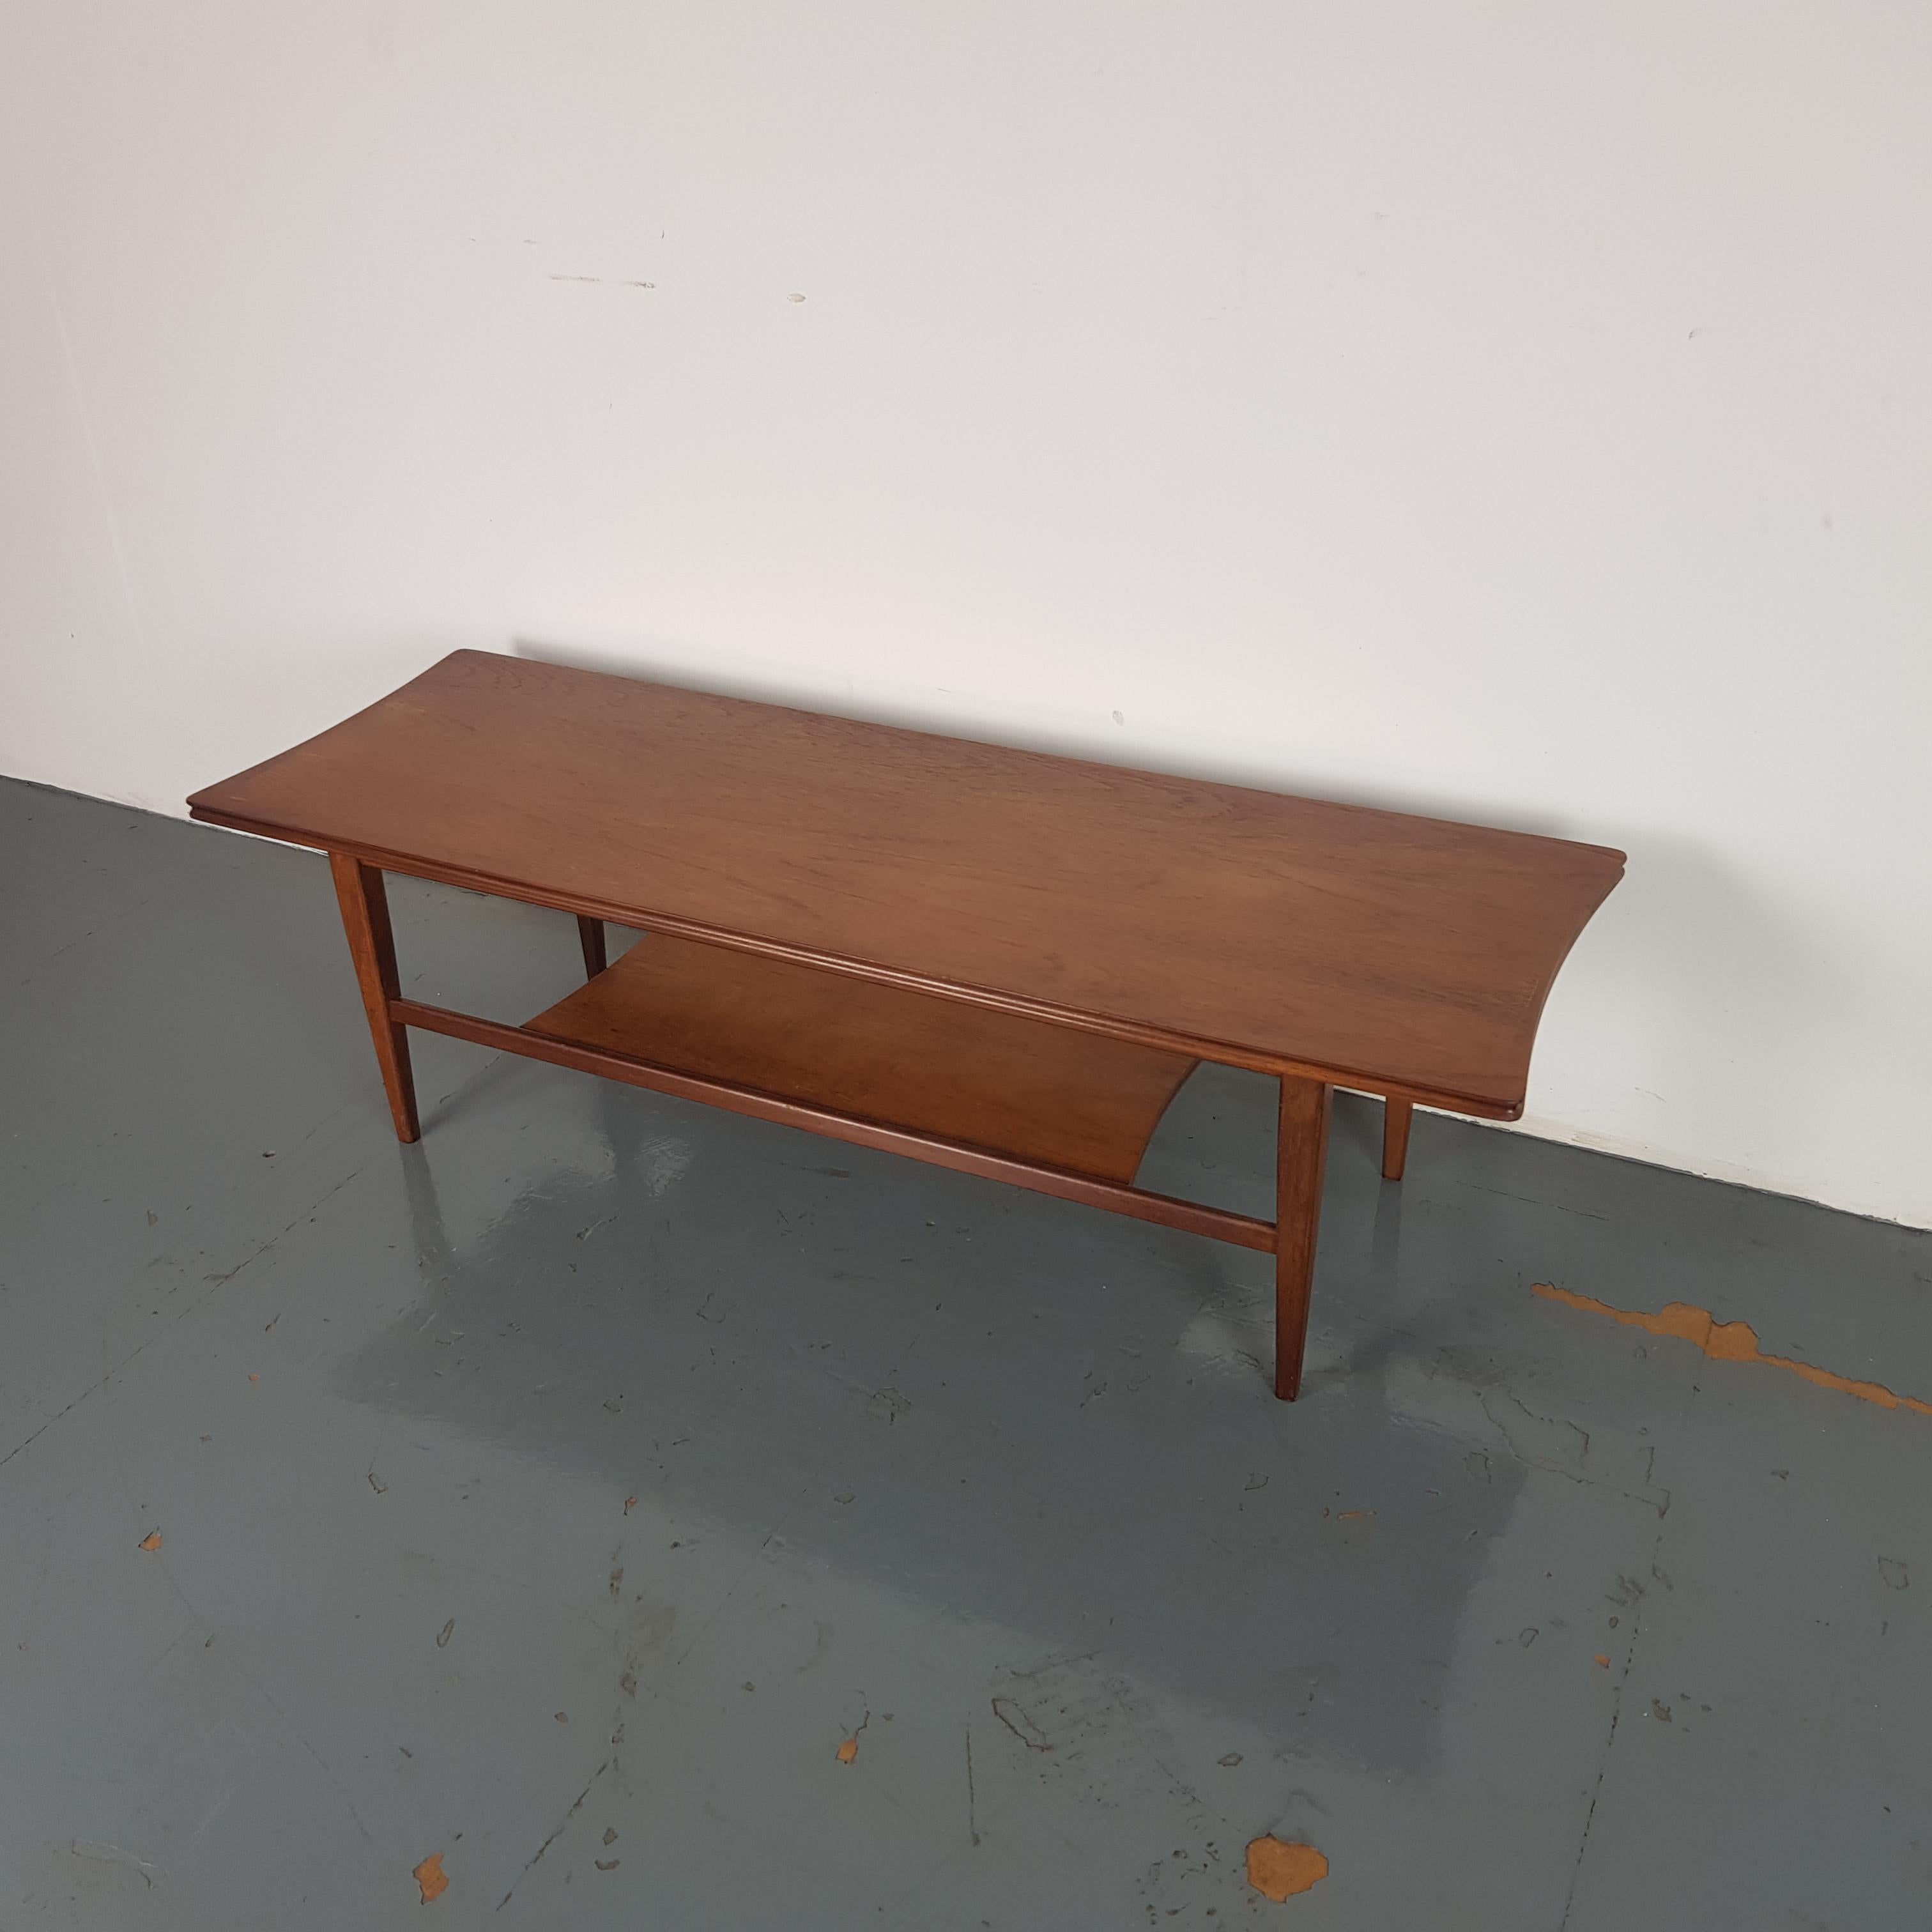 1960s Teak Coffee Table by Richard Hornby for Heals (Englisch)